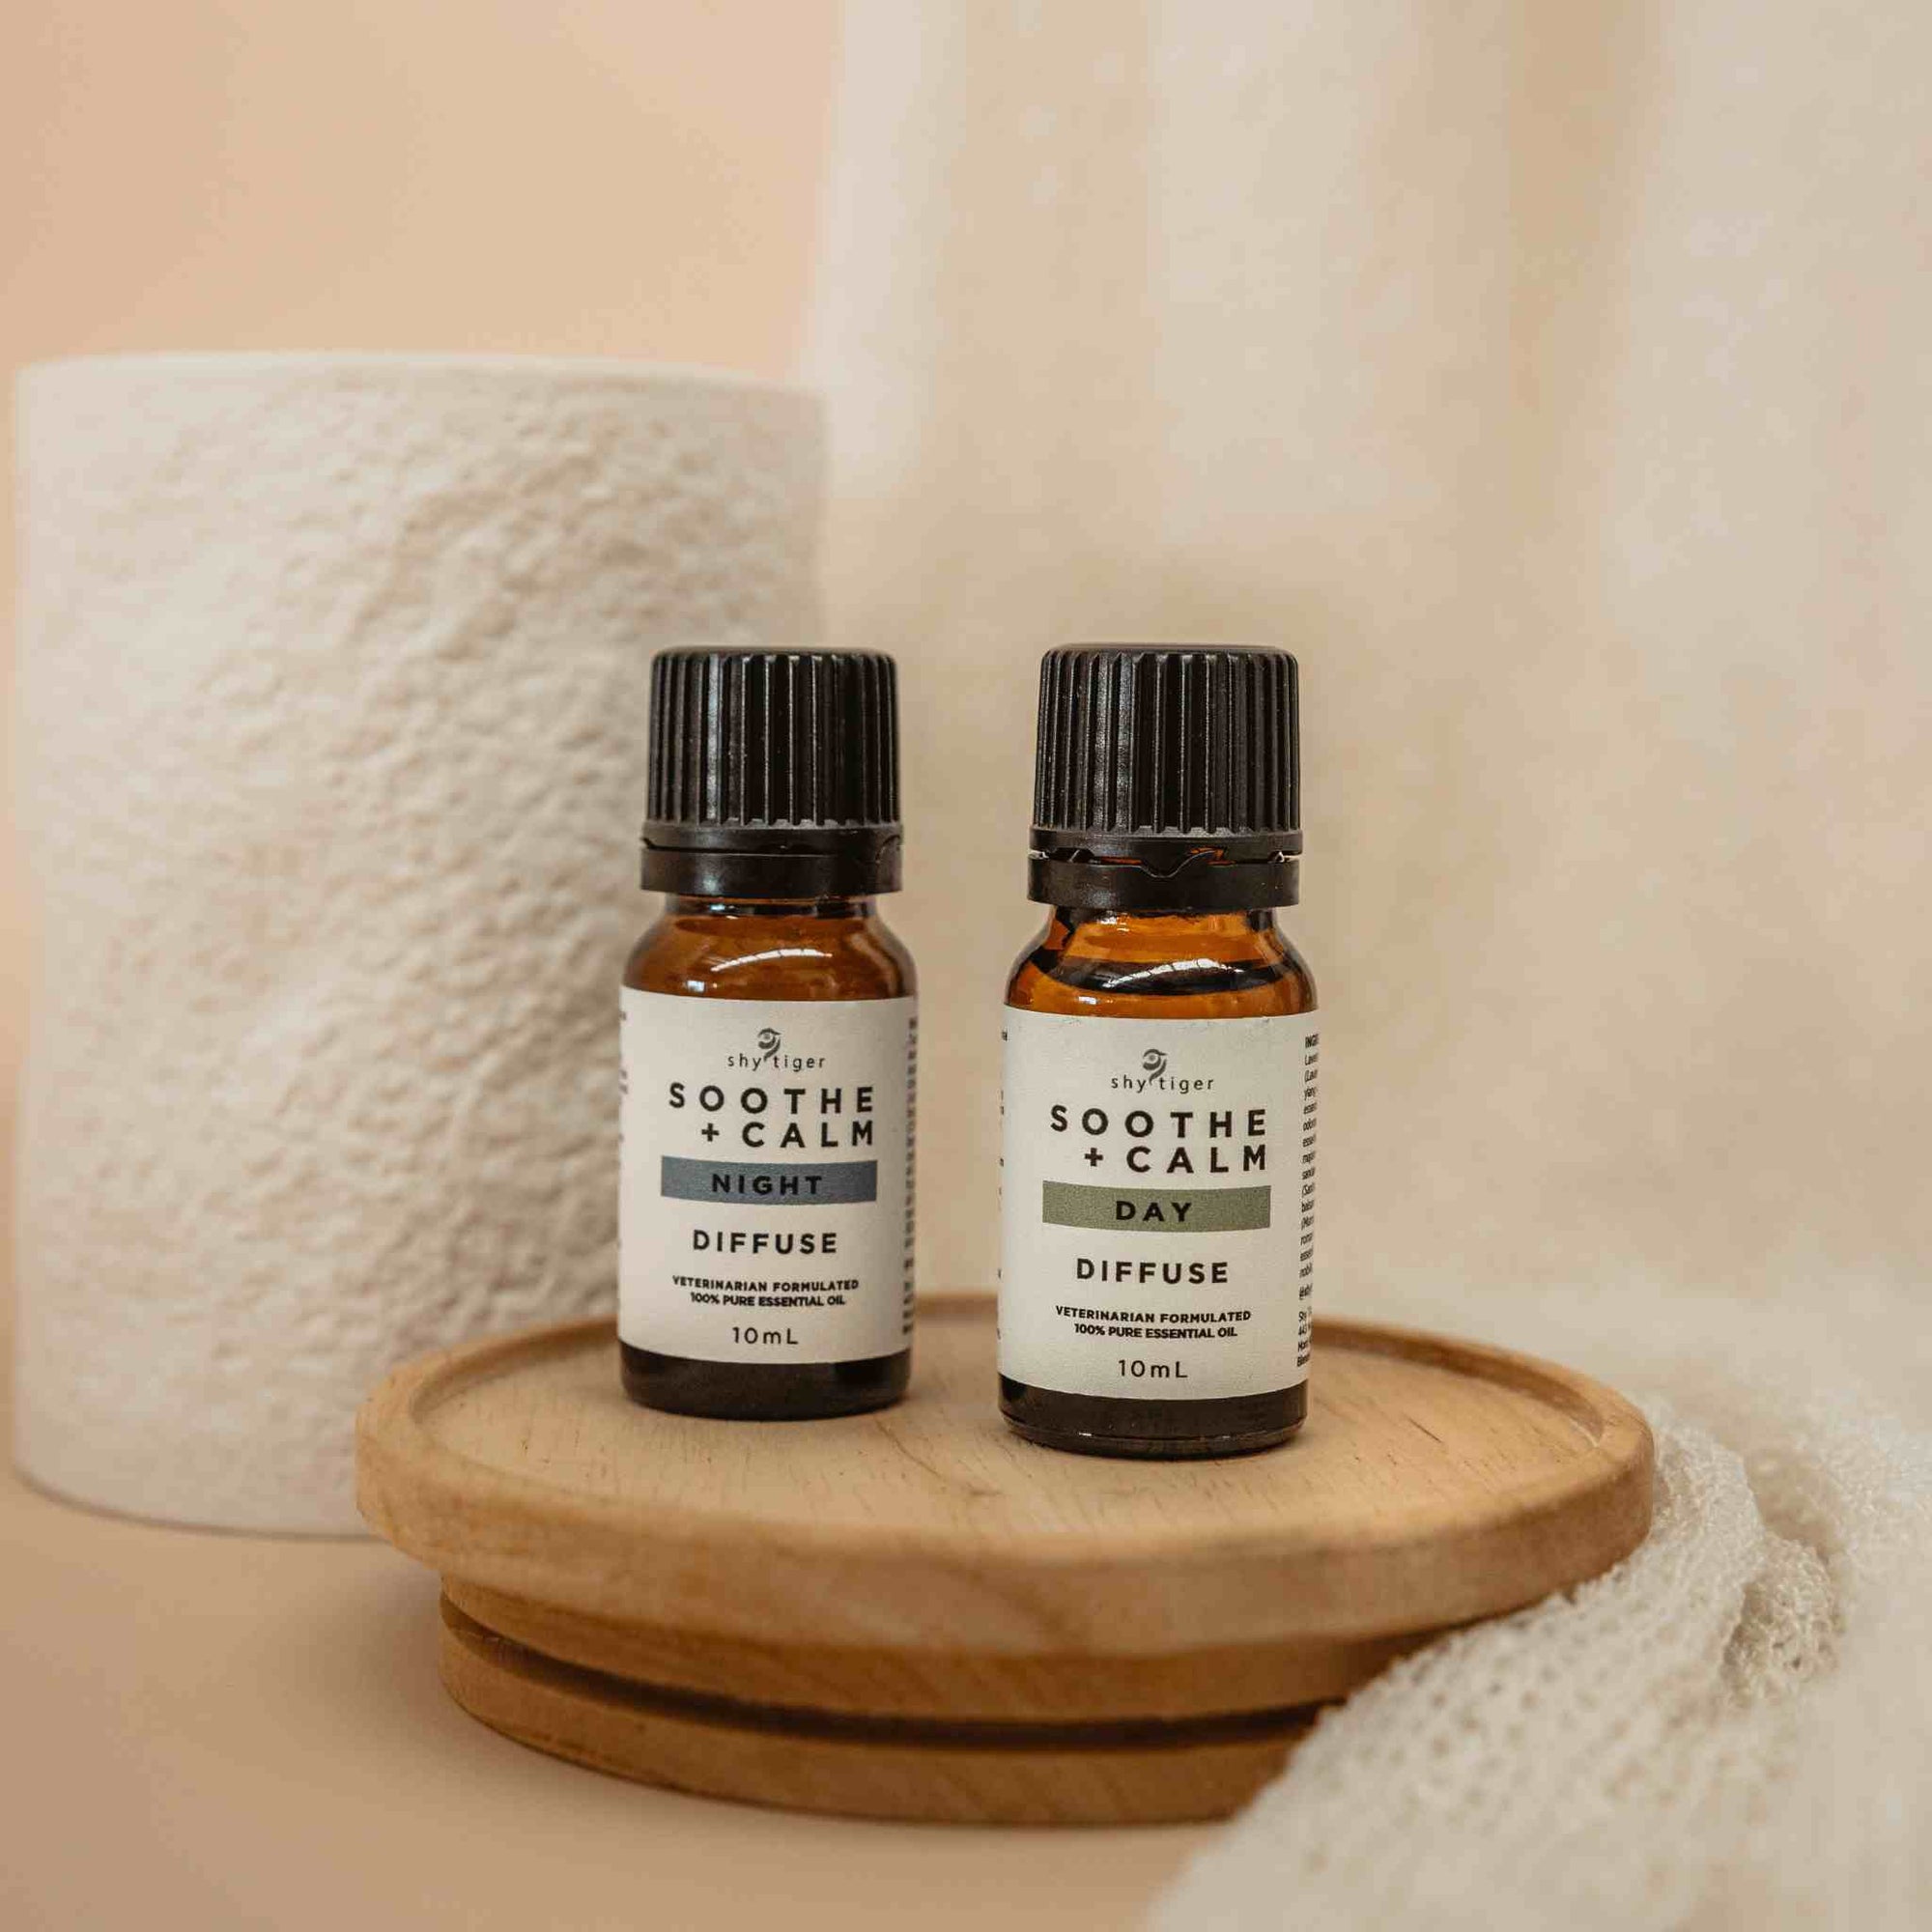 Soothe and Calm Day - Diffuse bottle